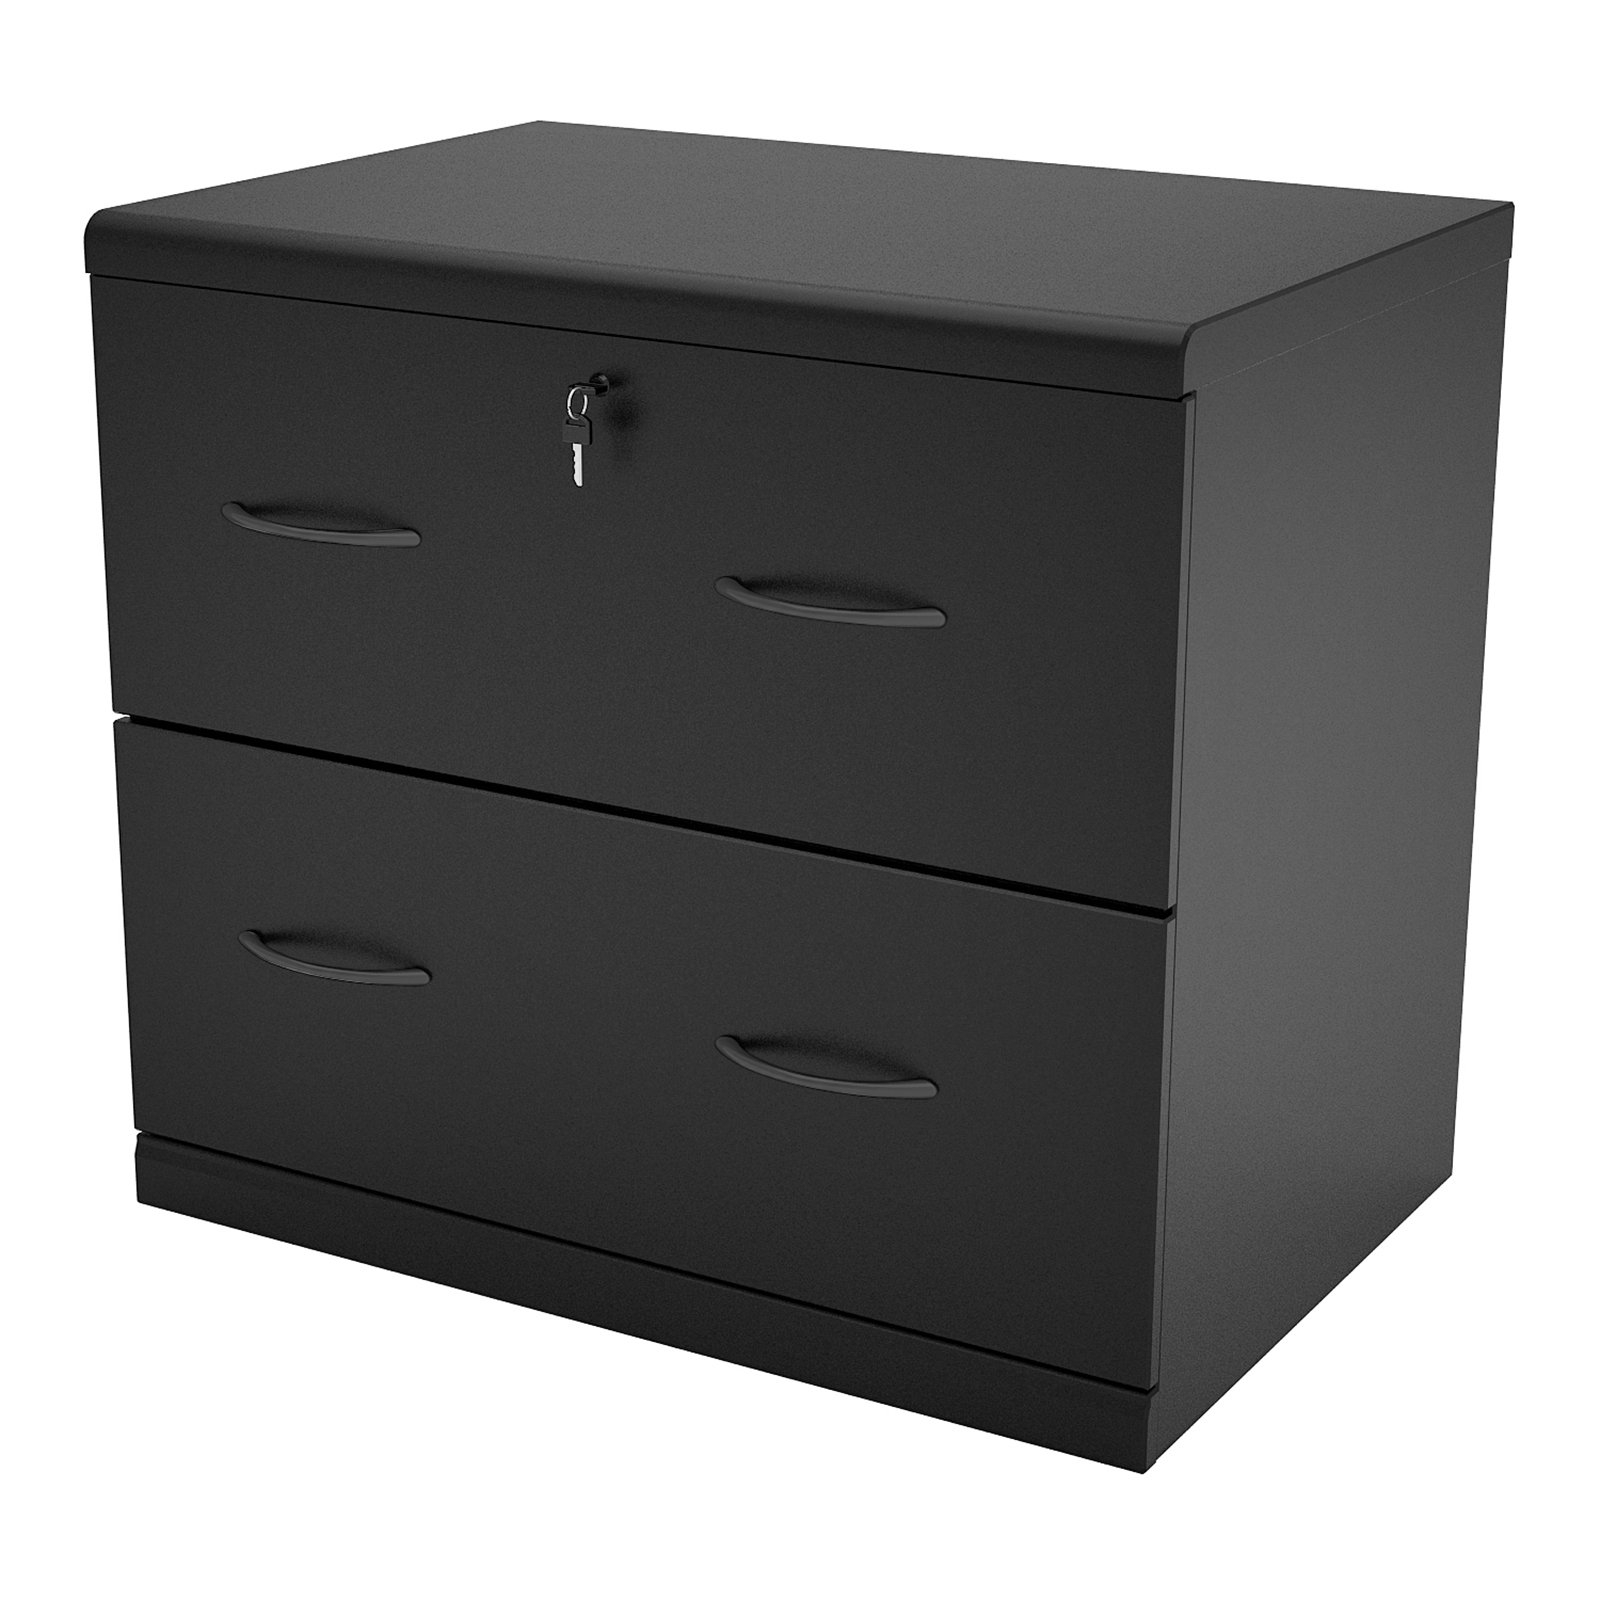 2 Drawer Lateral Wood Lockable Filing Cabinet Black Walmart pertaining to dimensions 1600 X 1600